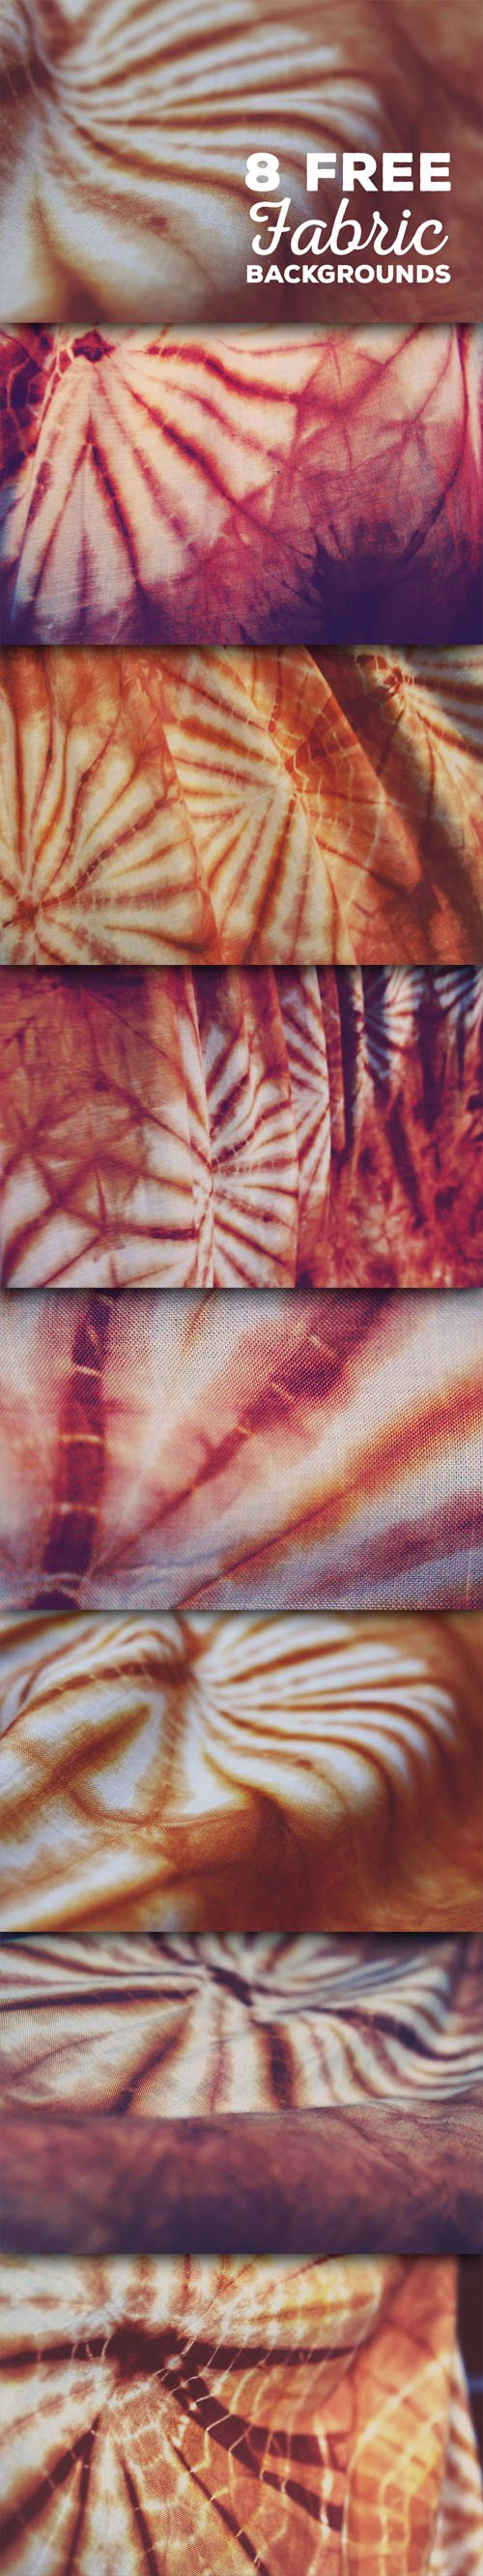 8 Artistic Fabric Abstract Backgrounds